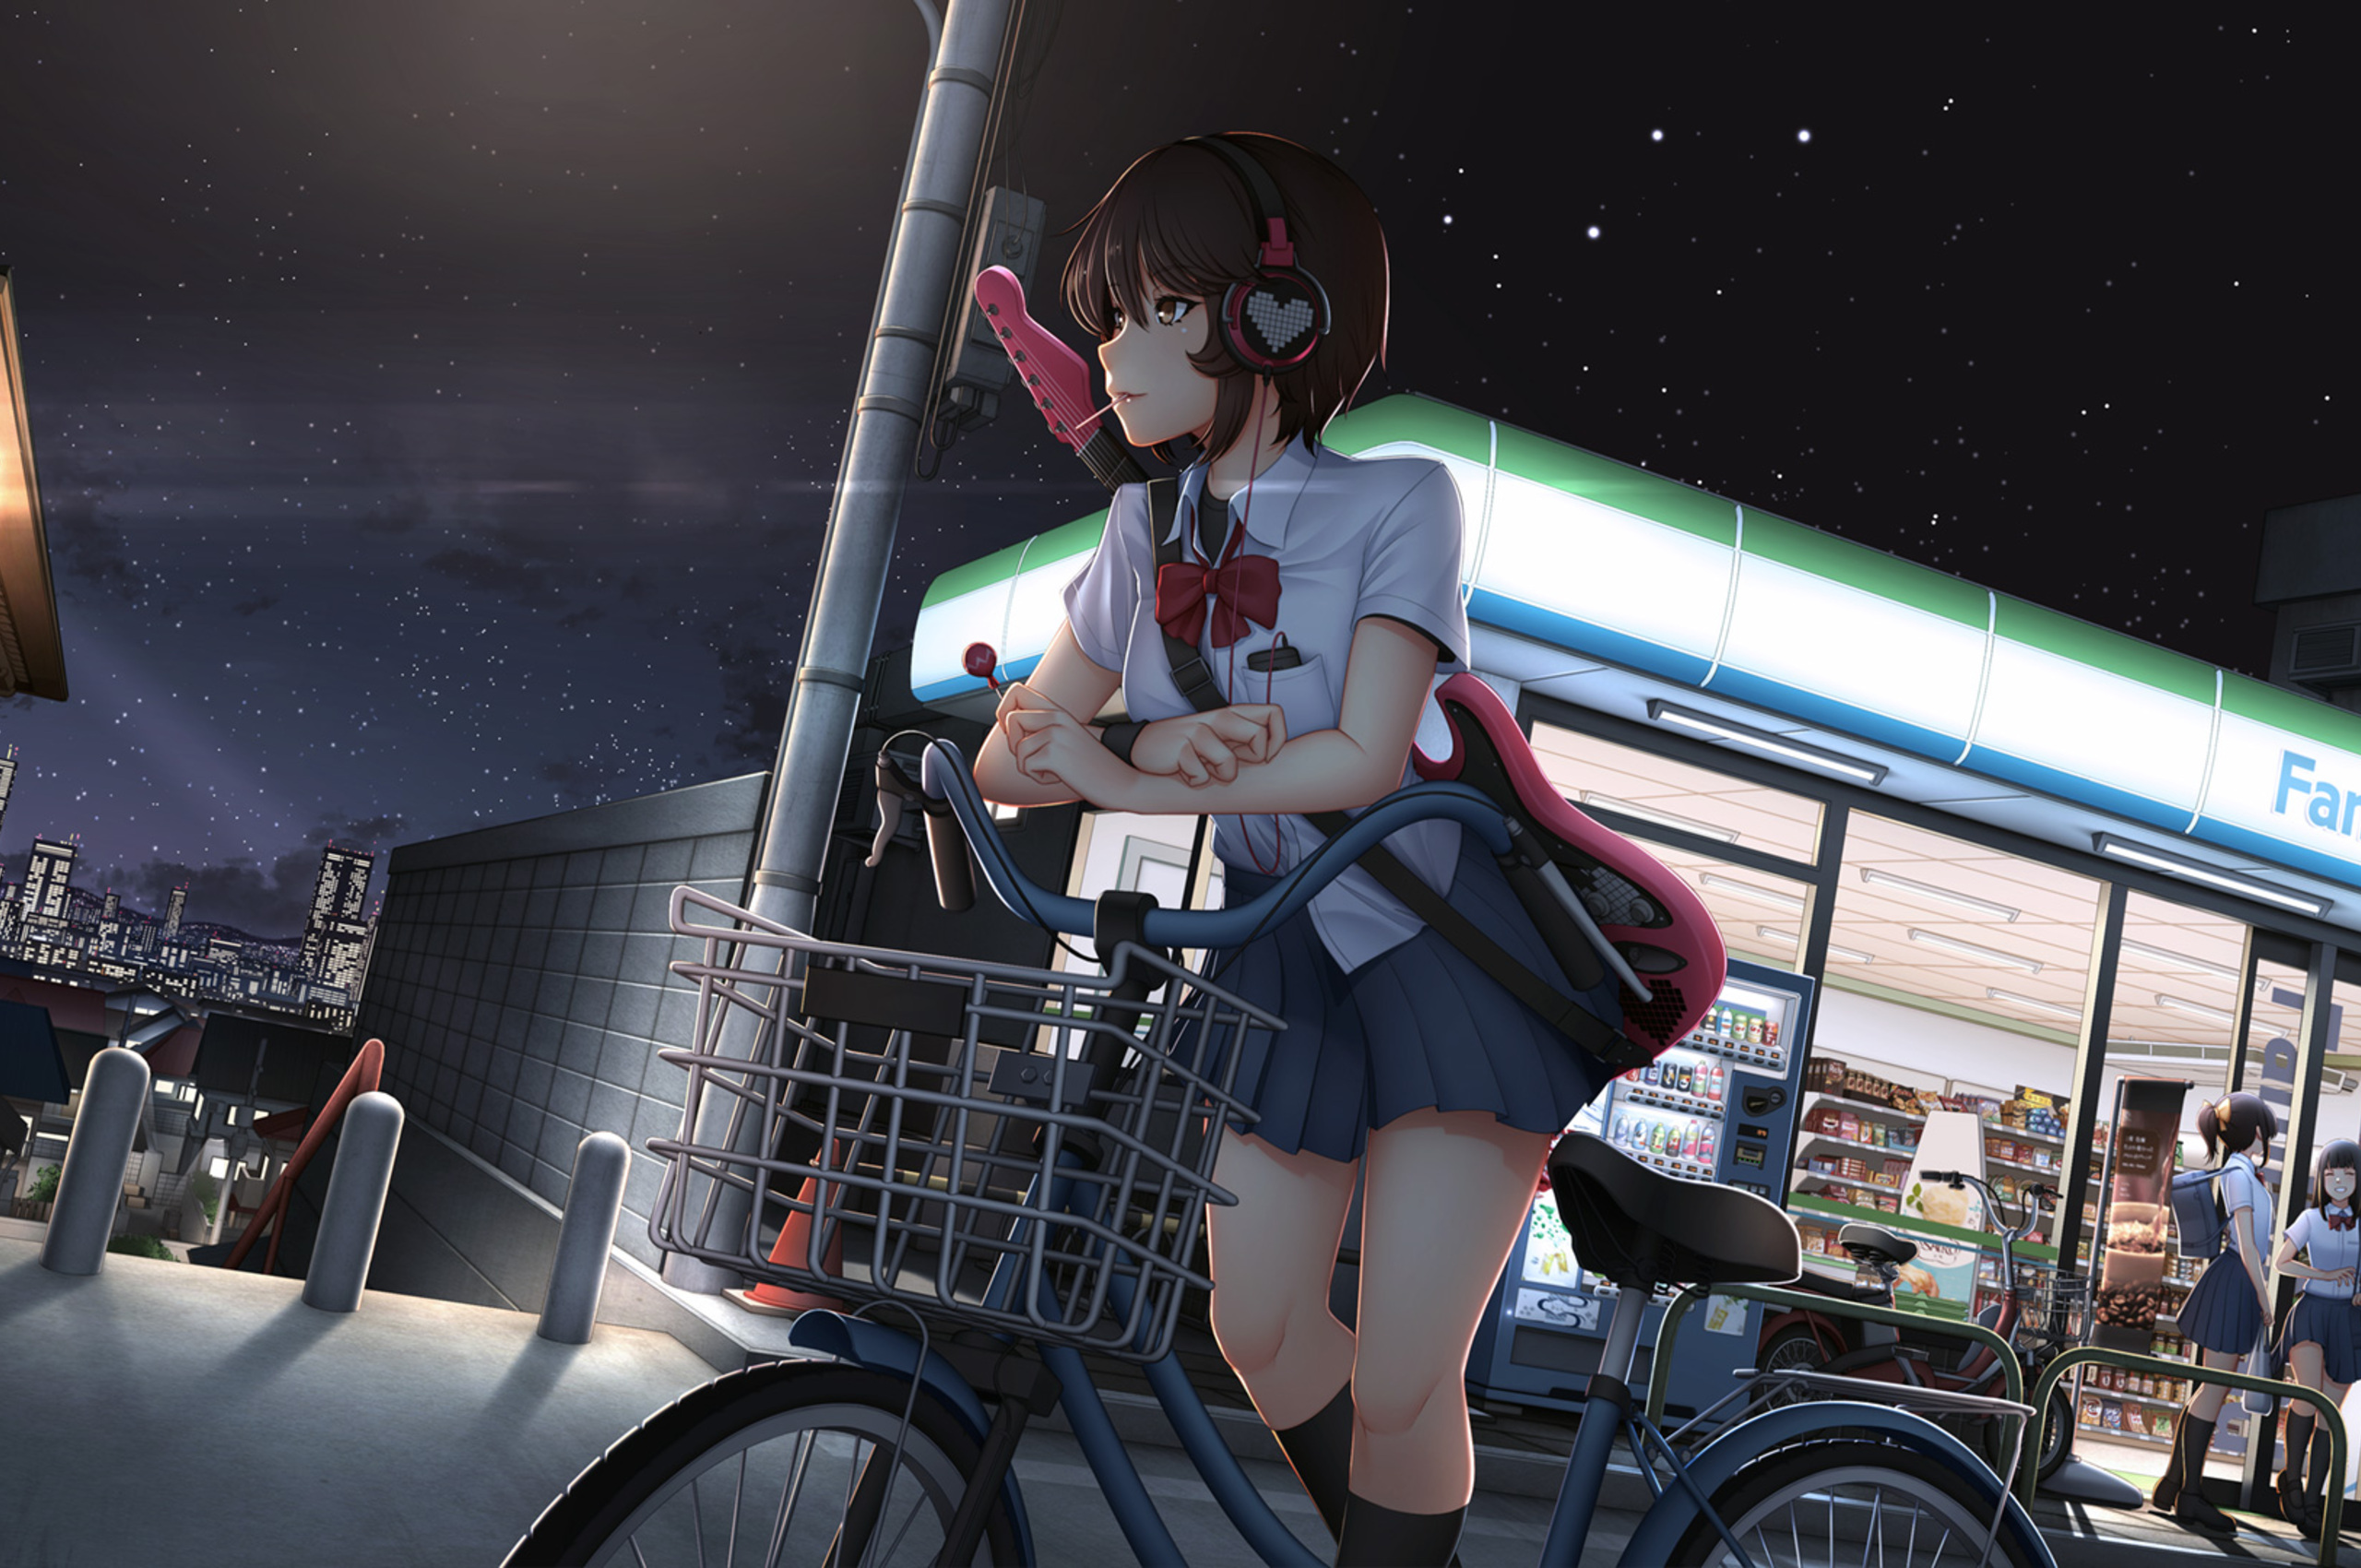 2560x1700 Cute Anime Girl With Bicycle Listening Music On